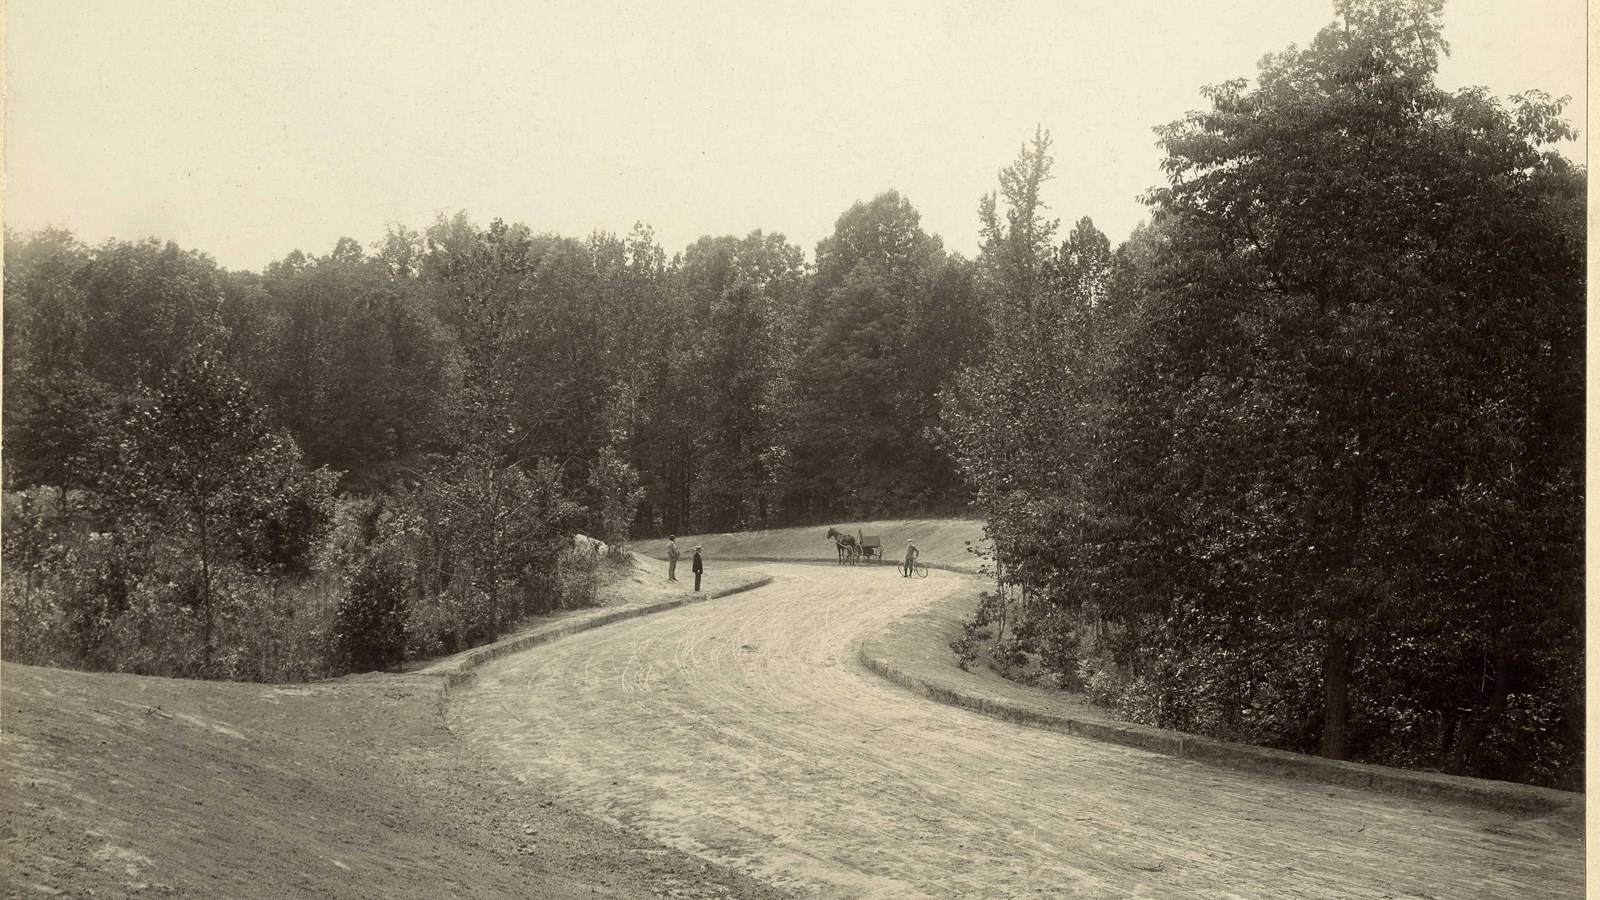 Black and white of curvy dirt path lined with trees on both sides with people and horse and carriage